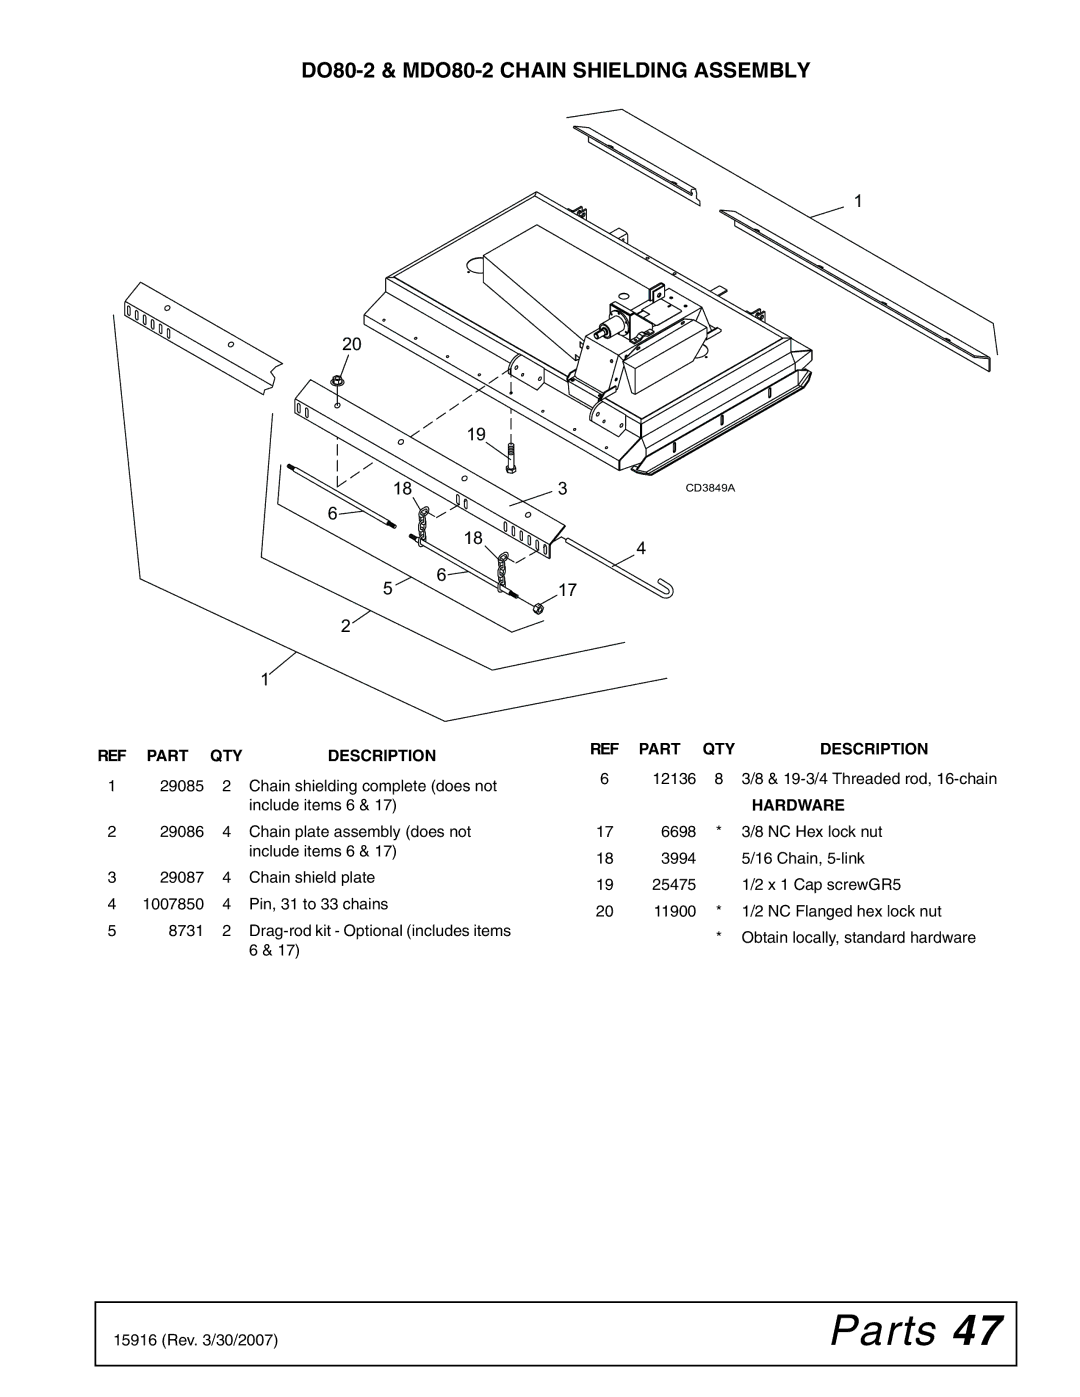 Woods Equipment manual DO80-2 & MDO80-2 Chain Shielding Assembly 